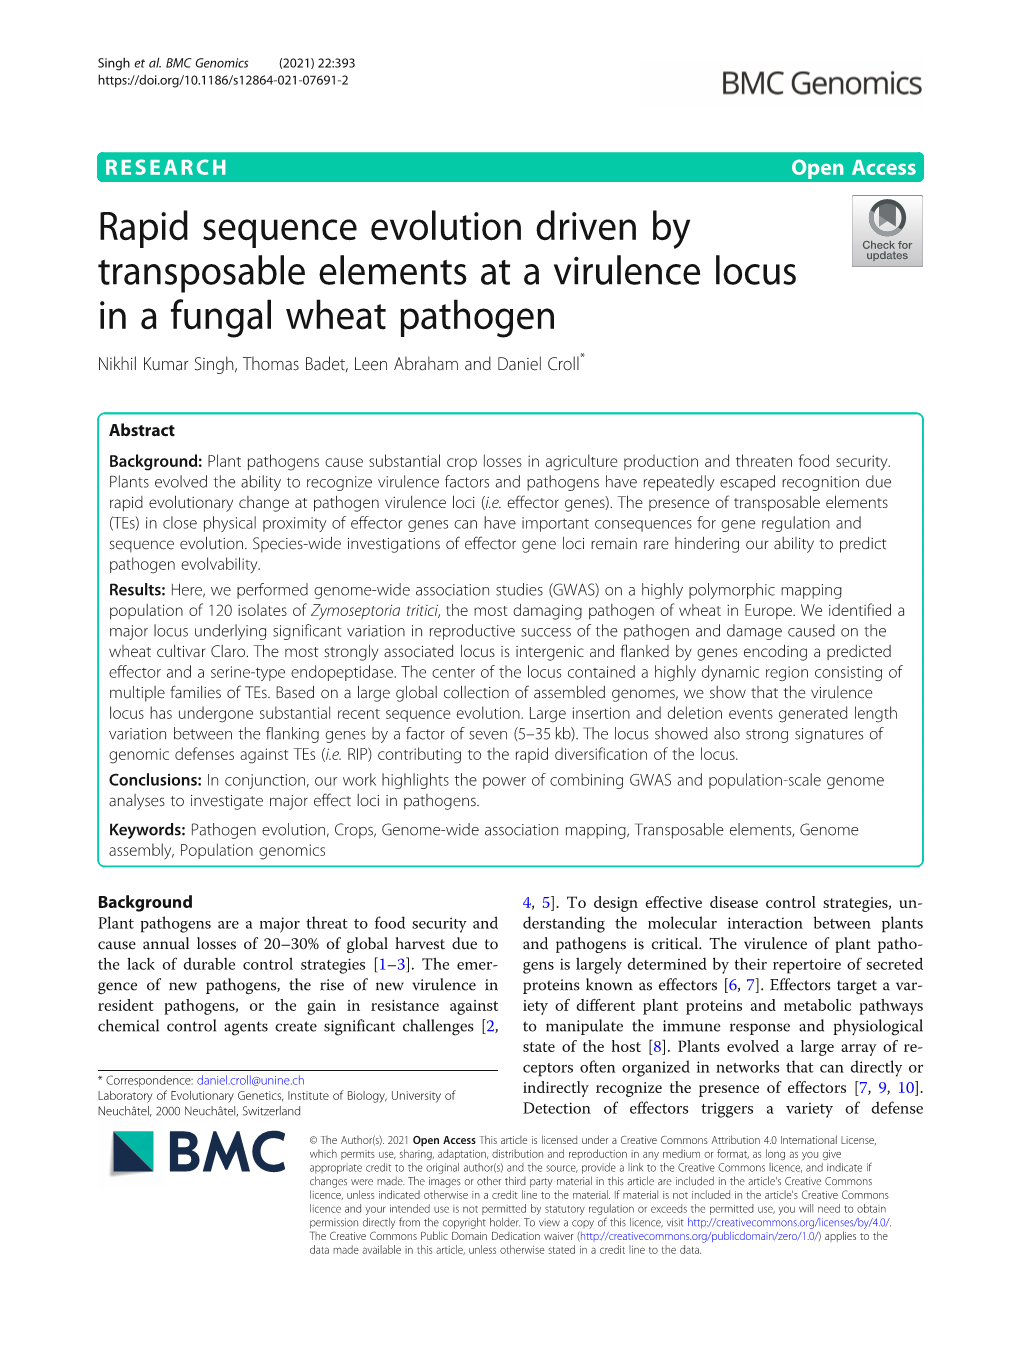 Rapid Sequence Evolution Driven by Transposable Elements at A